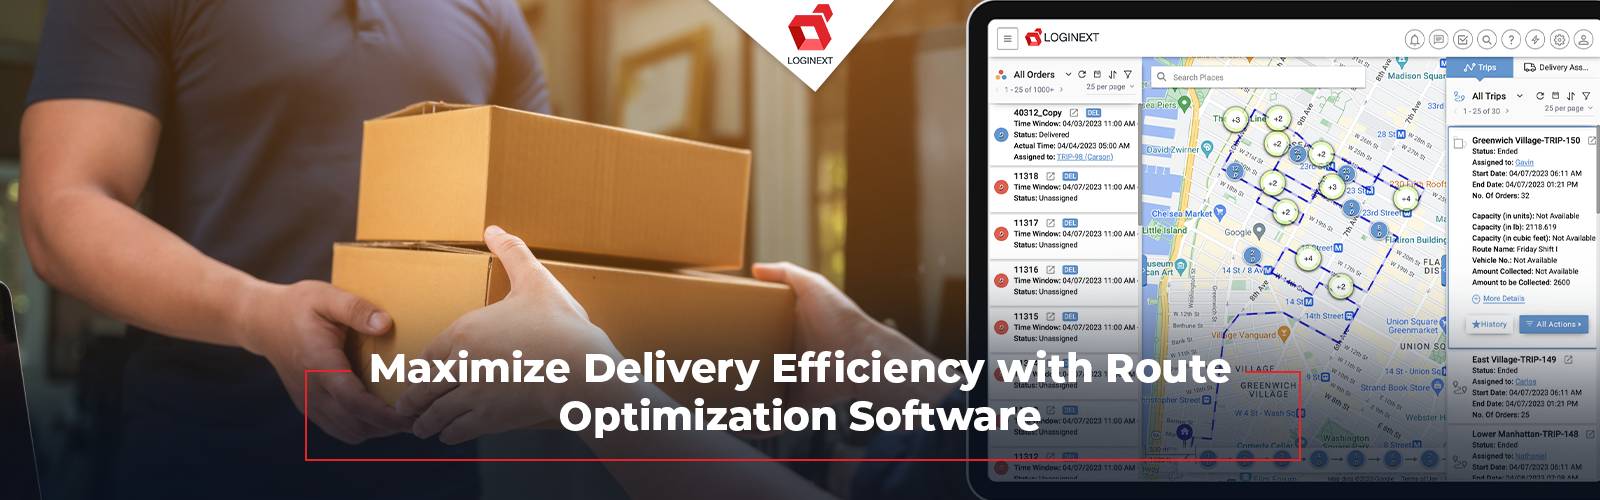 route optimization software that maximizes delivery efficiency